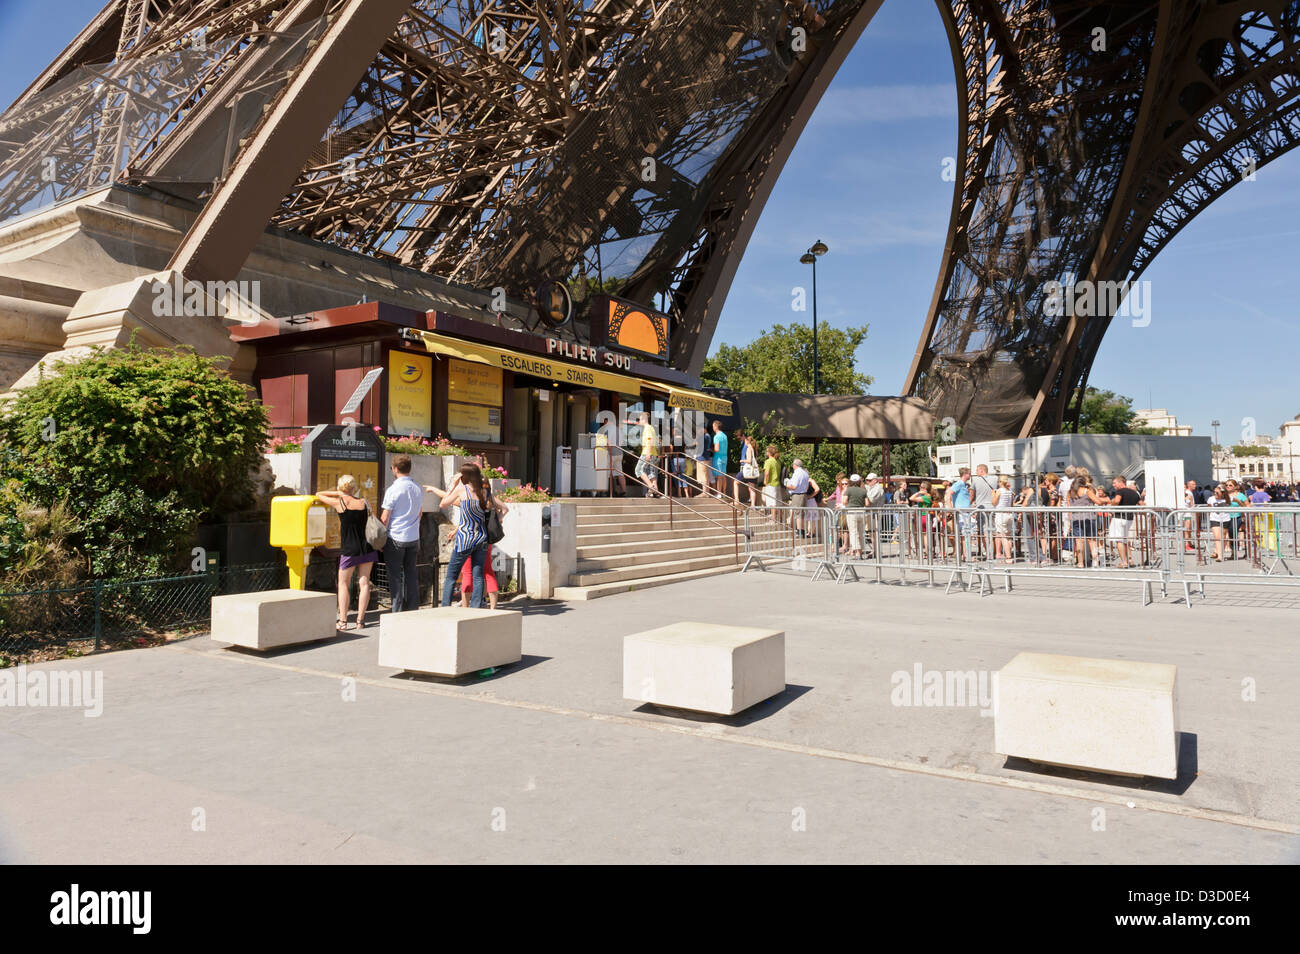 Tourists queuing to buy tickets, Eiffel Tower, Paris, France. Stock Photo